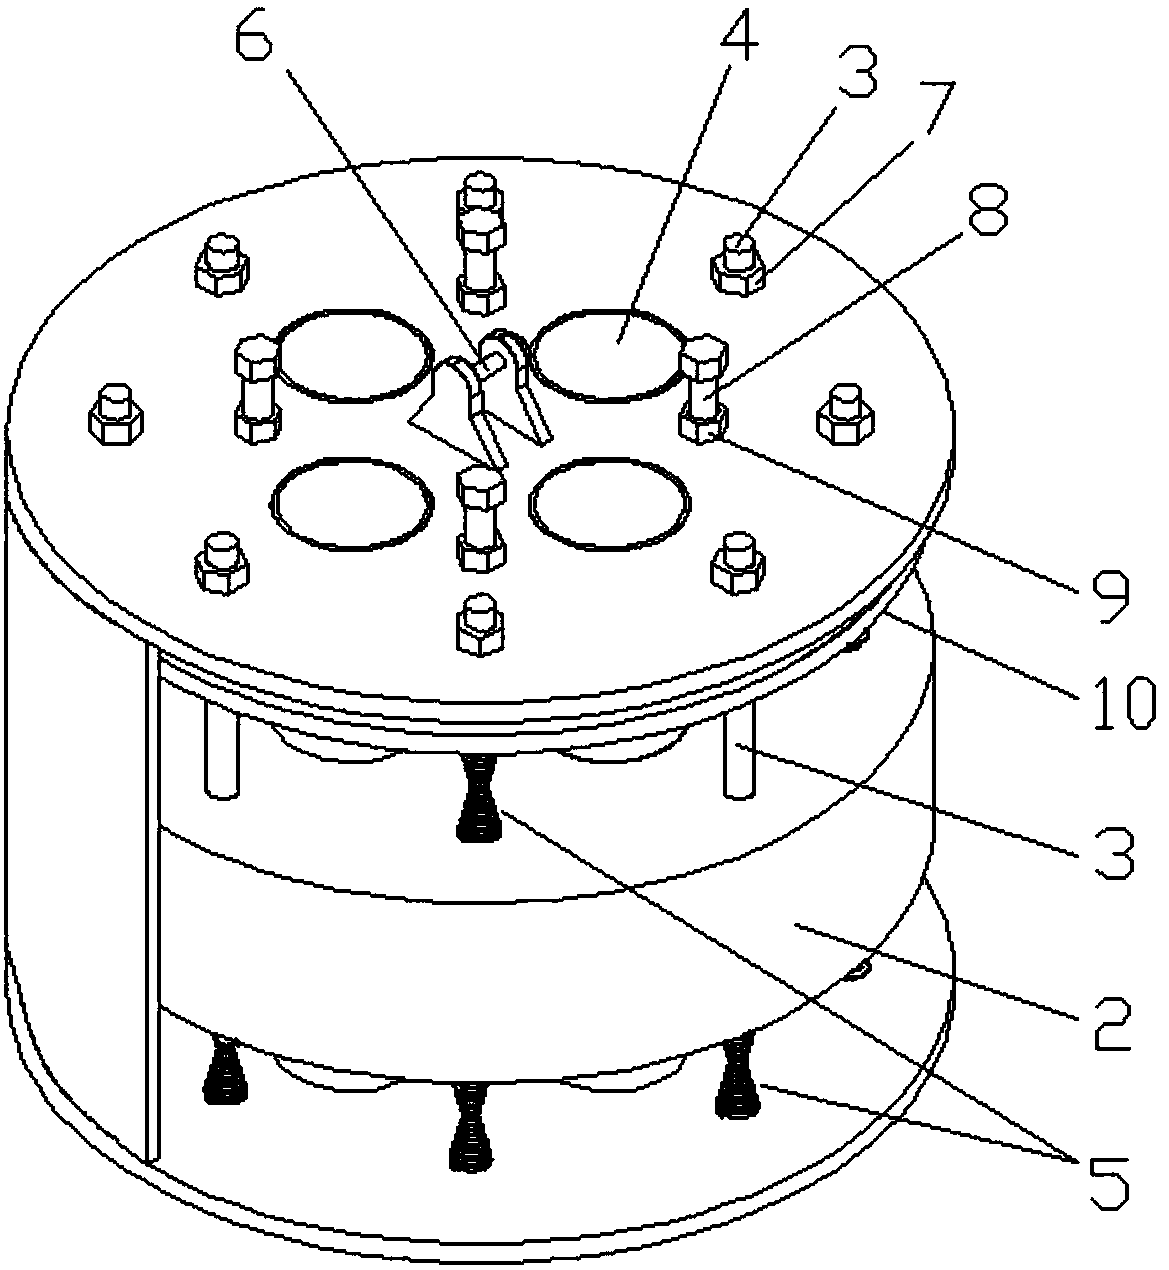 Reciprocating type vibratory forced ramming hammer